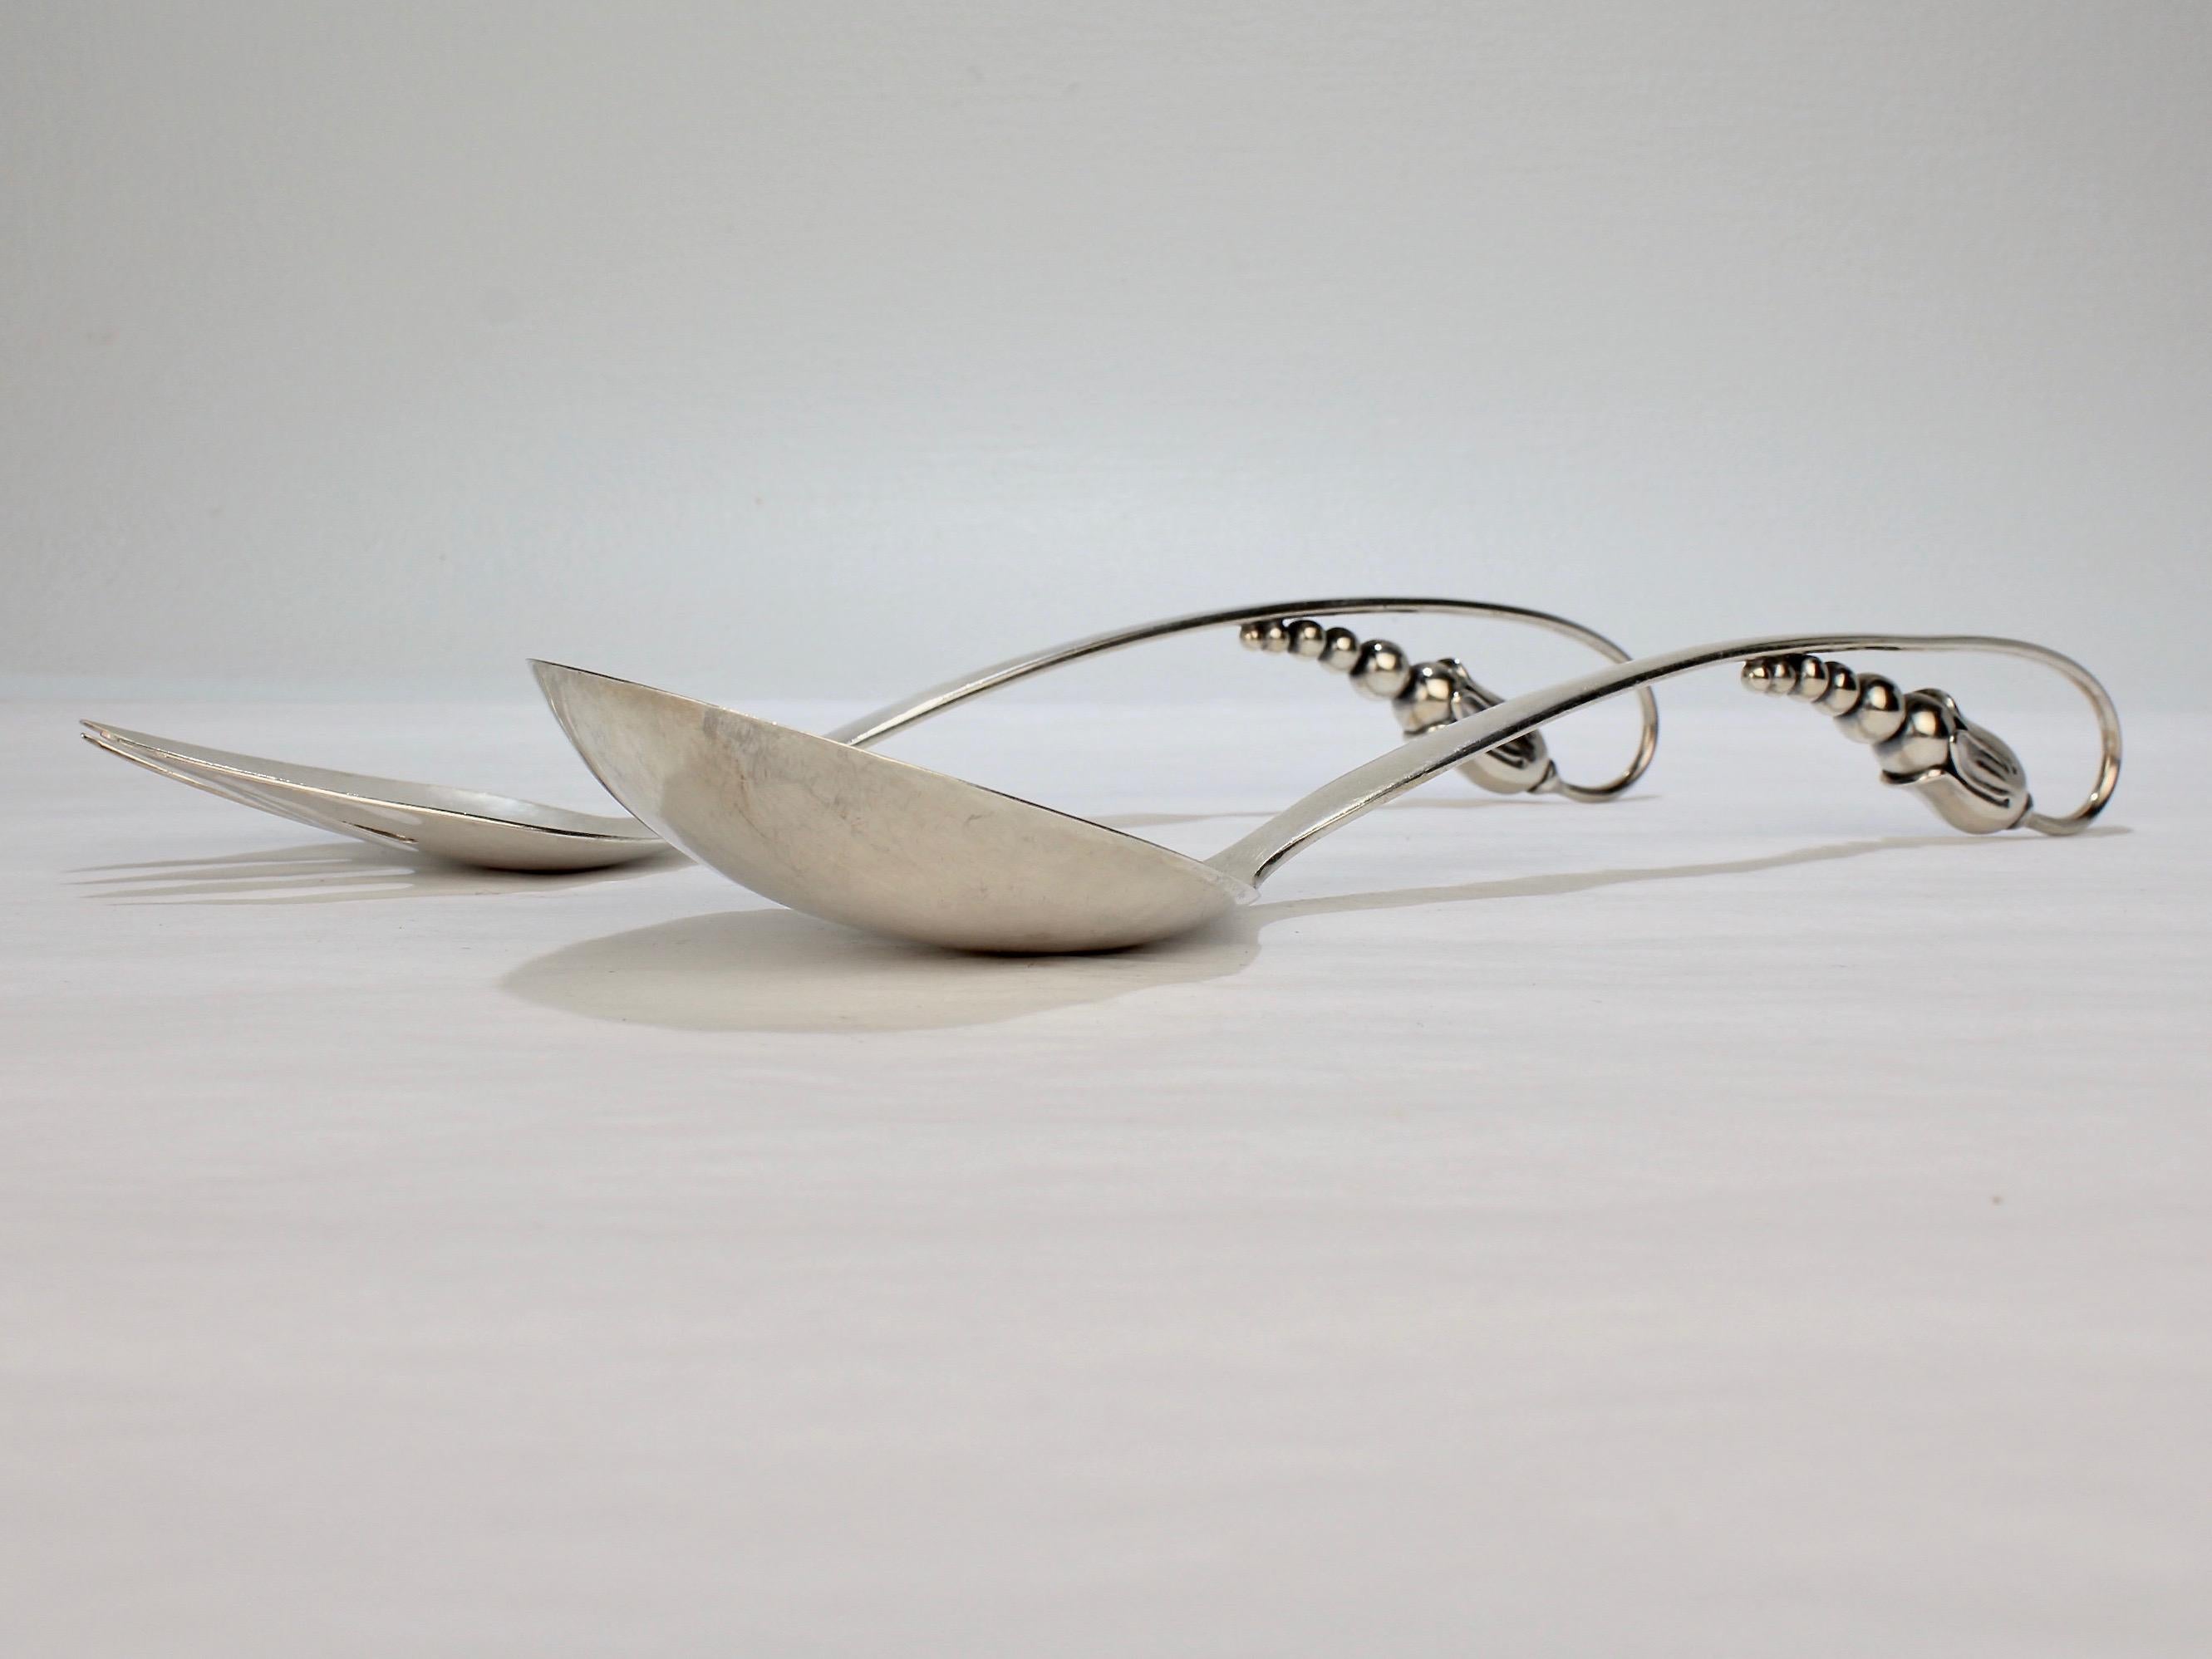 Pair of Danish Modern Blossom Sterling Silver Salad Servers by O V Mogensen In Good Condition For Sale In Philadelphia, PA